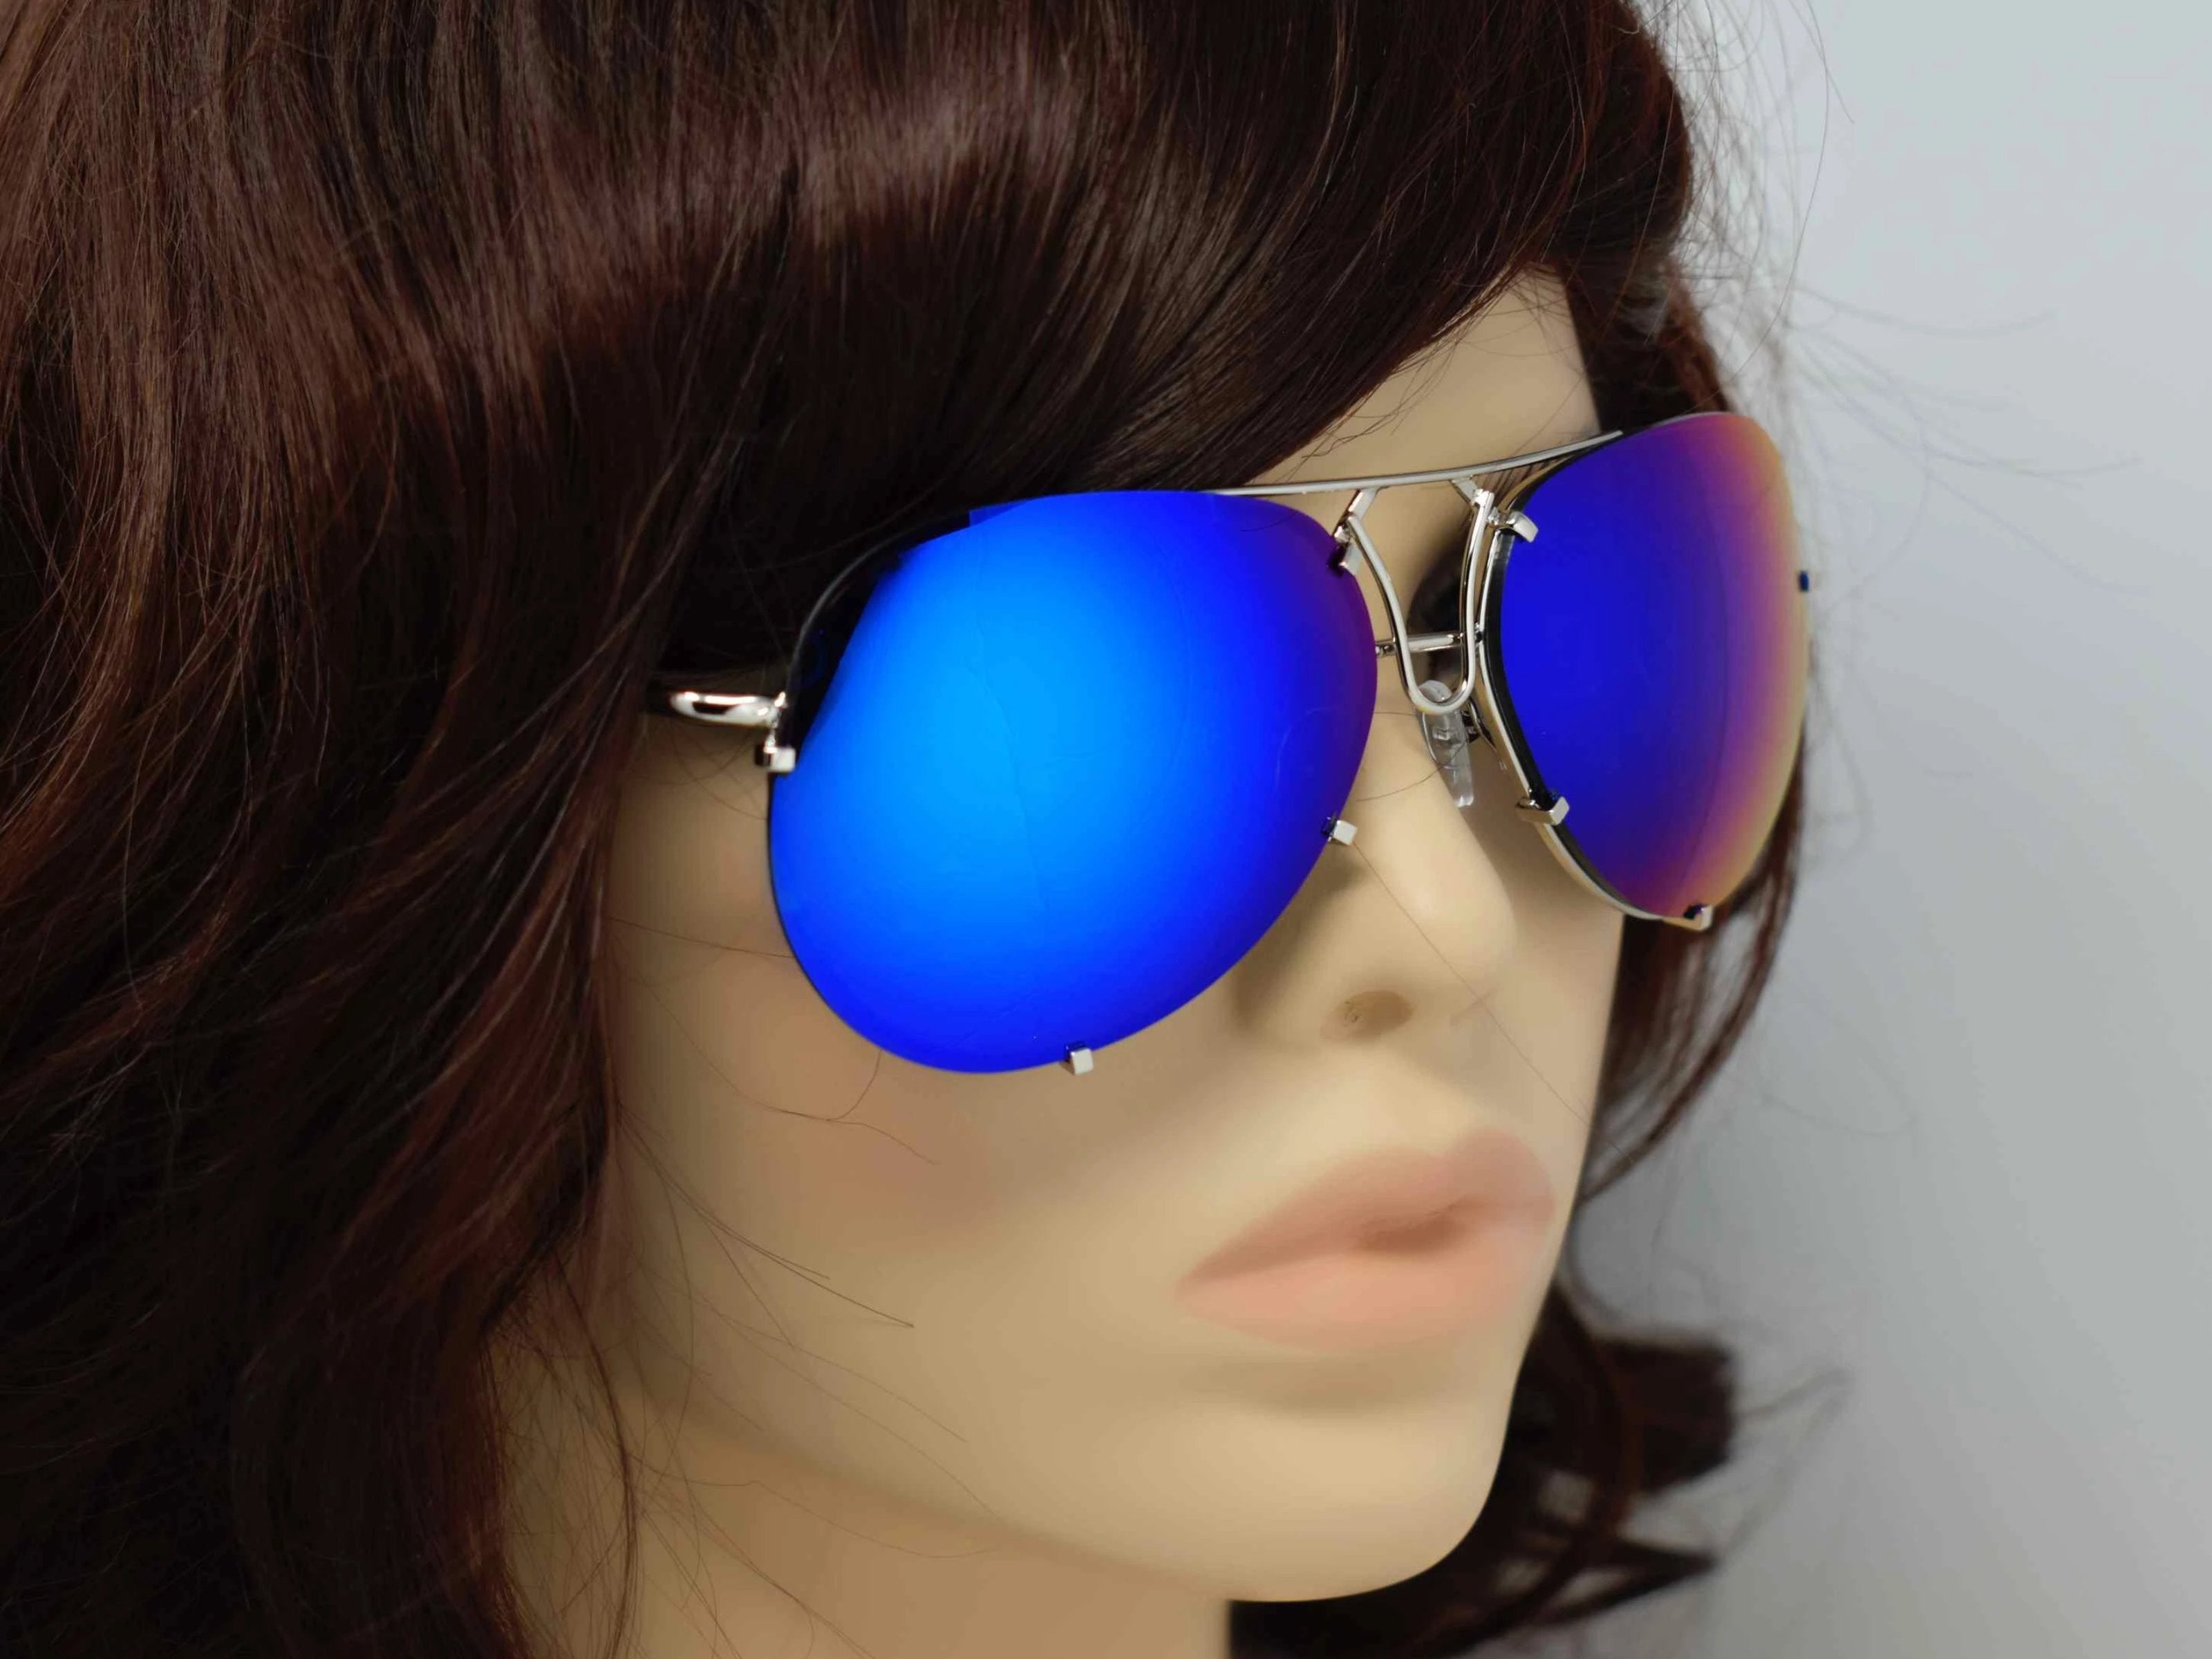 Don't get caught without these yarrow silver frame royal blue mirrored lens aviator sunglasses.